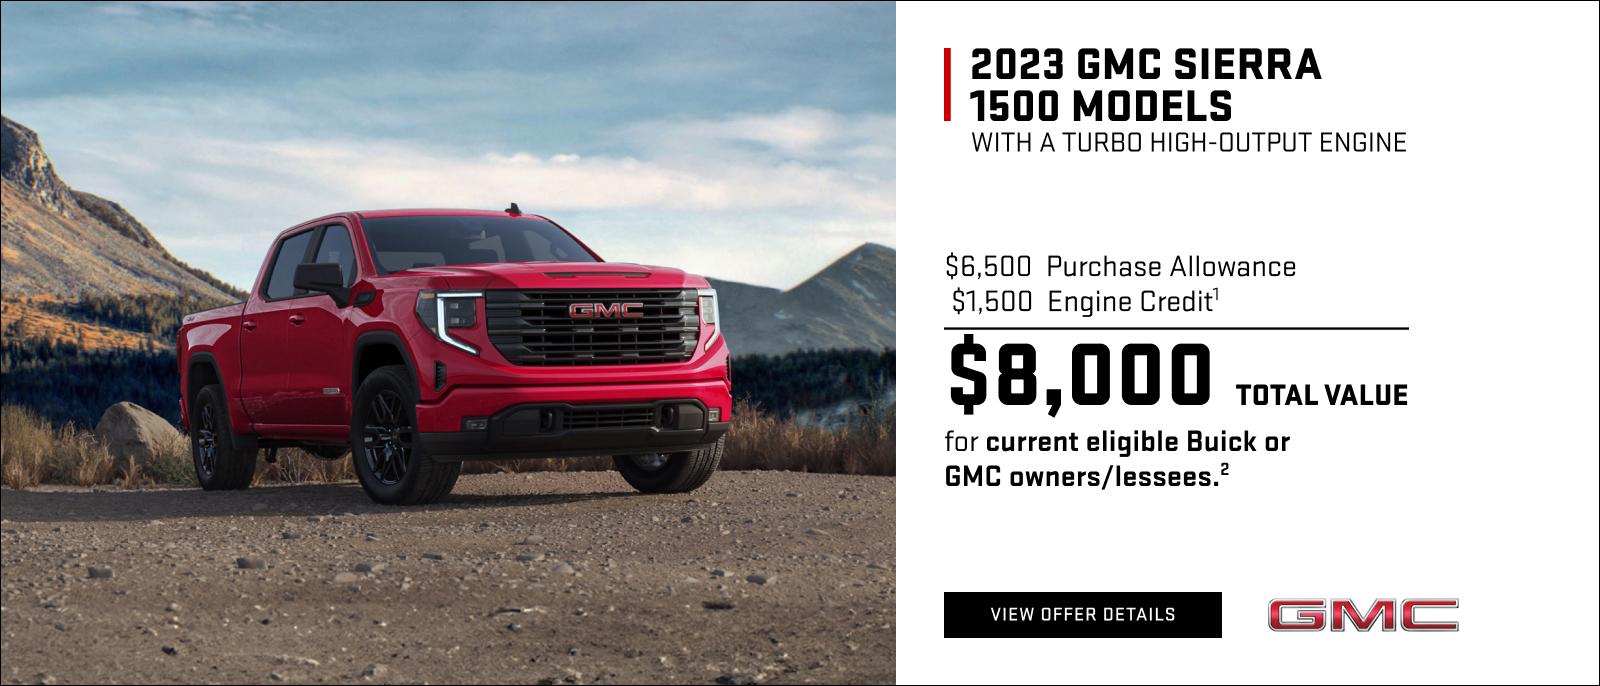 $6,500 Purchase Allowance
$1,500 Engine Credit1
$8,000 Total Value for current eligible Buick or GMC owners/lessees.2